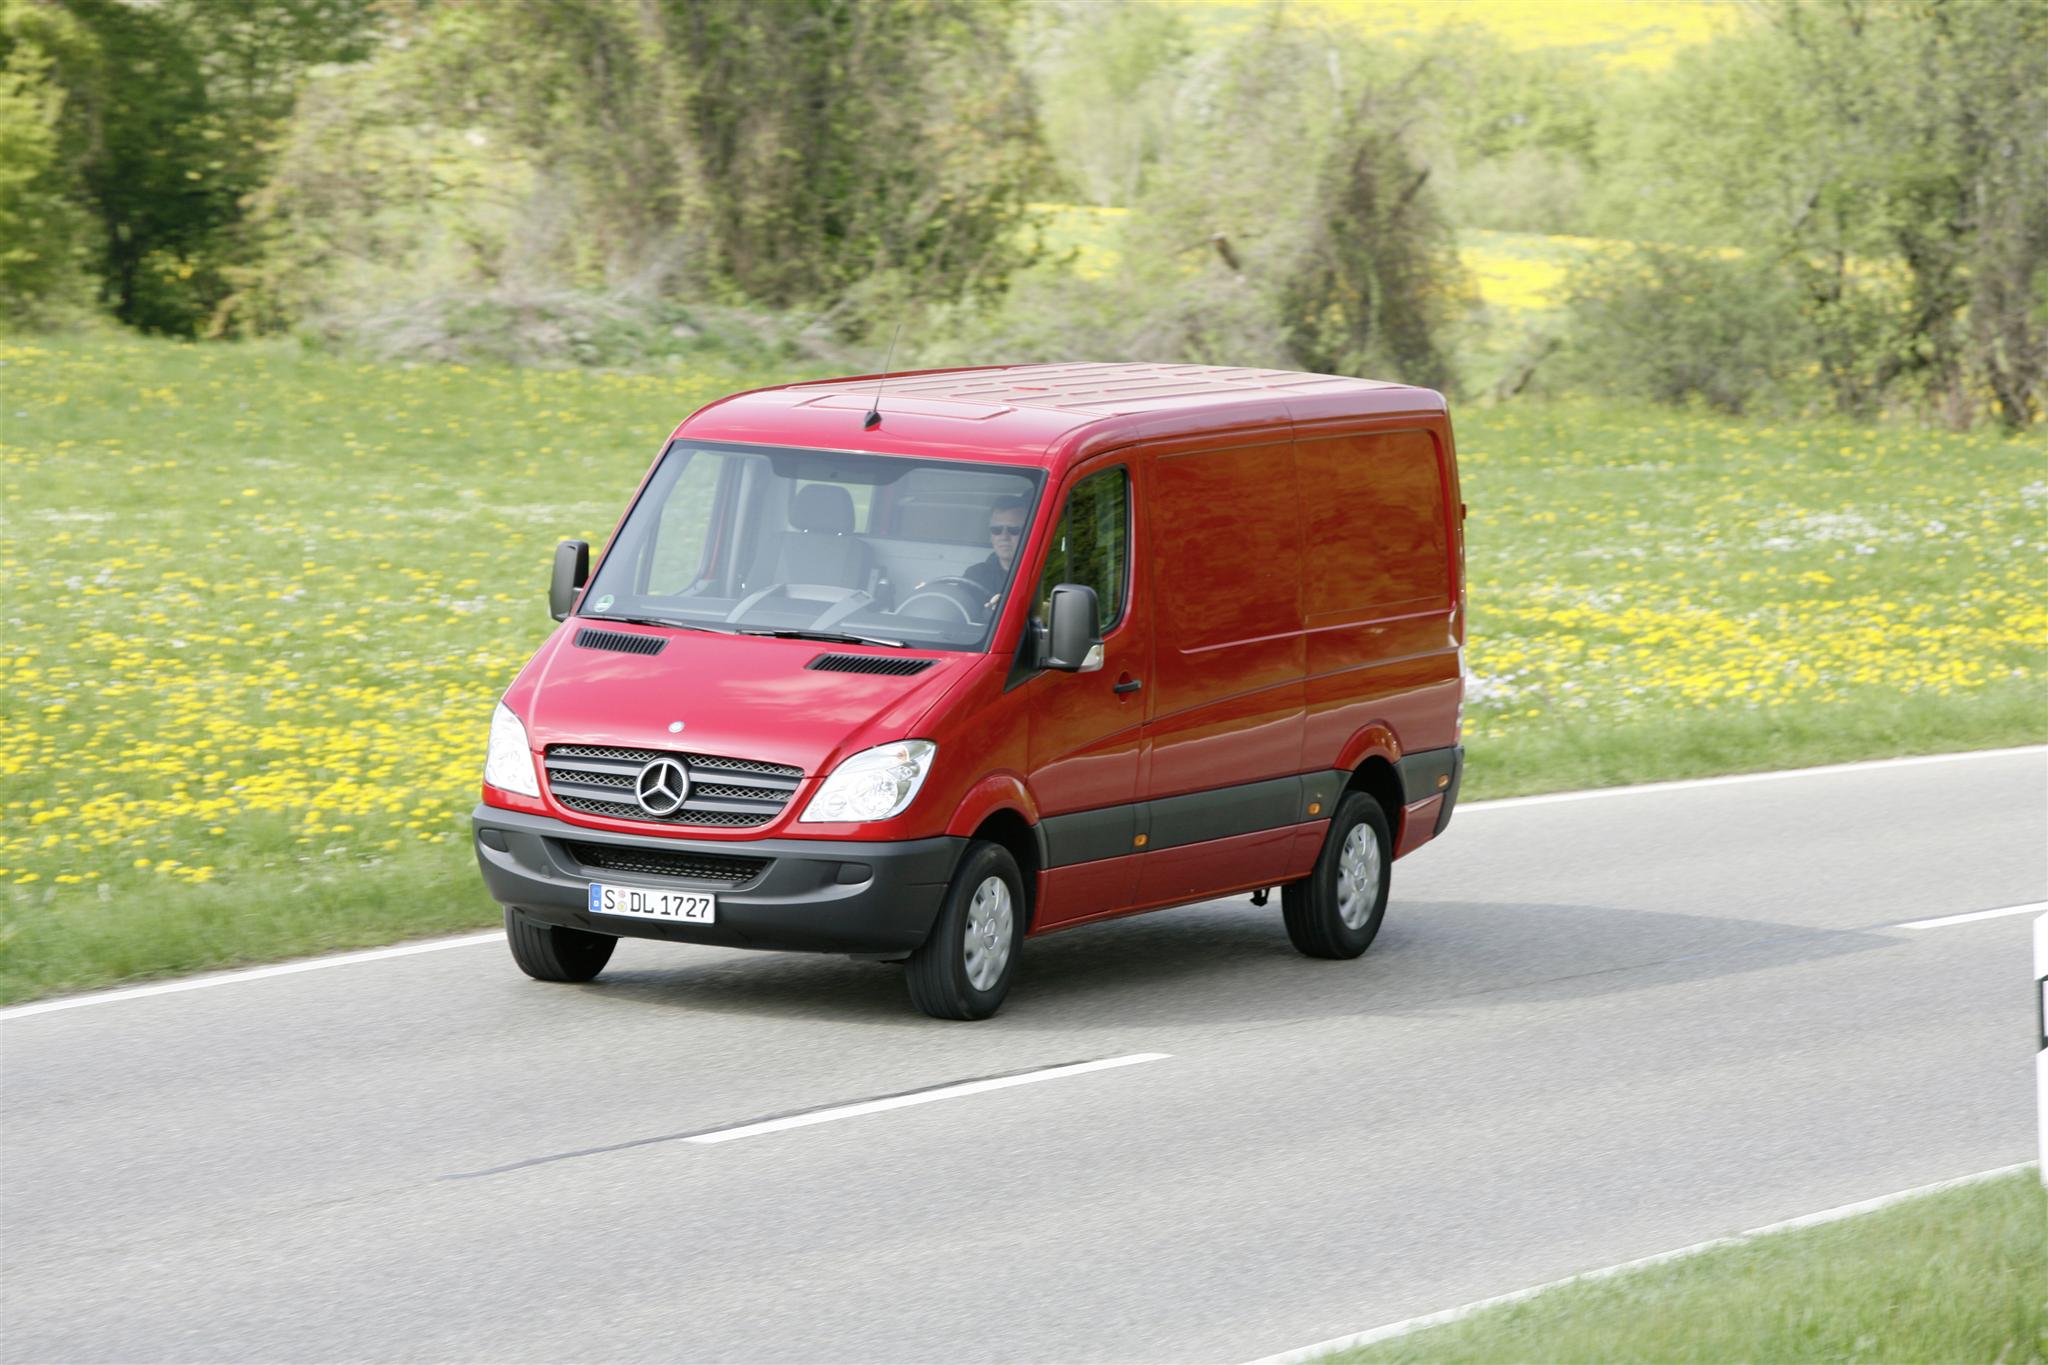 Mercedes-benz Sprinter 2012: Review, Amazing Pictures and Images – Look